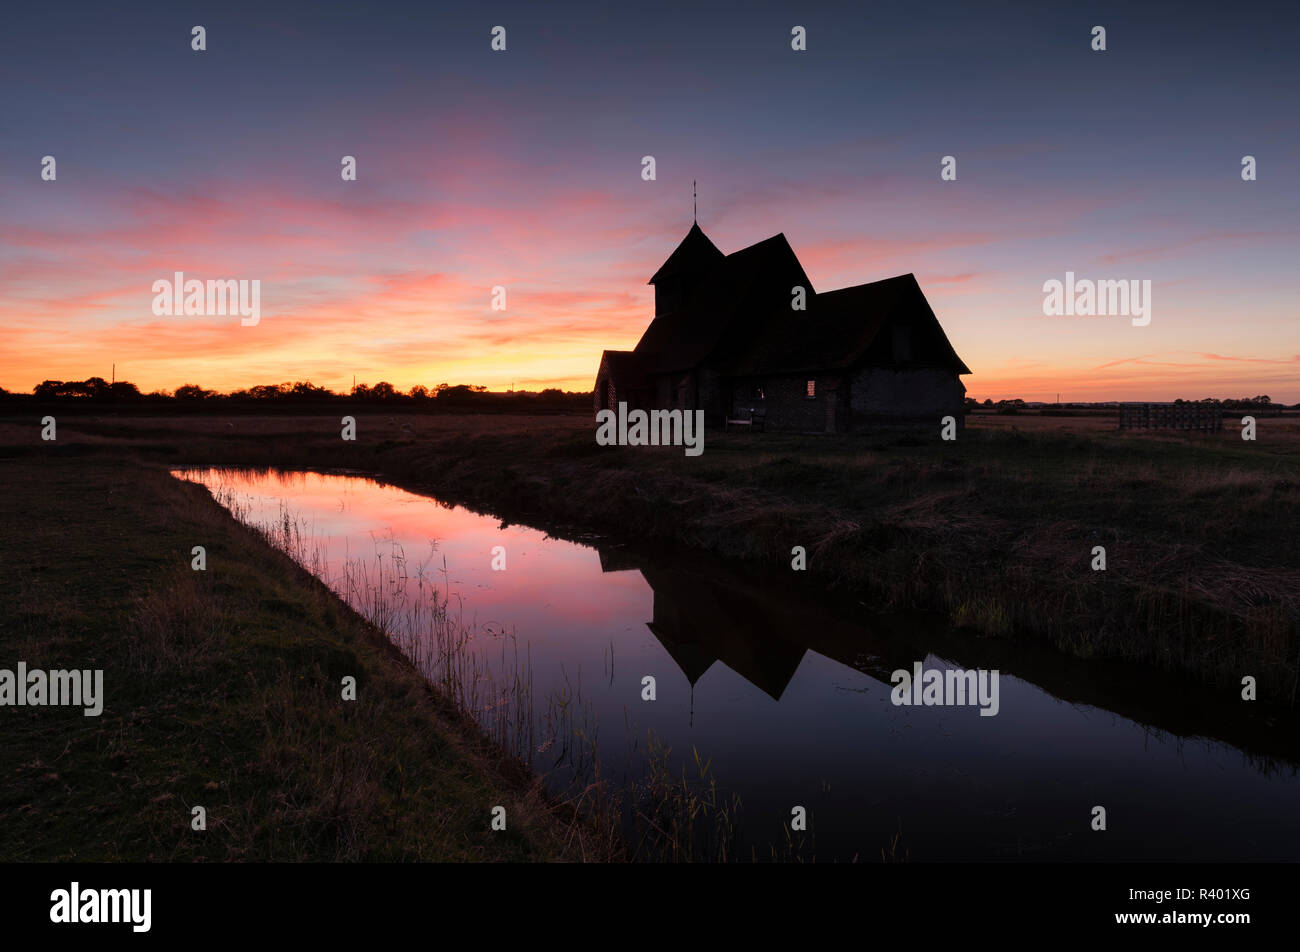 St. Thomas a Becket Church, also known as Fairfield Church, silhouetted at twilight on Romney Marsh, Kent. Stock Photo